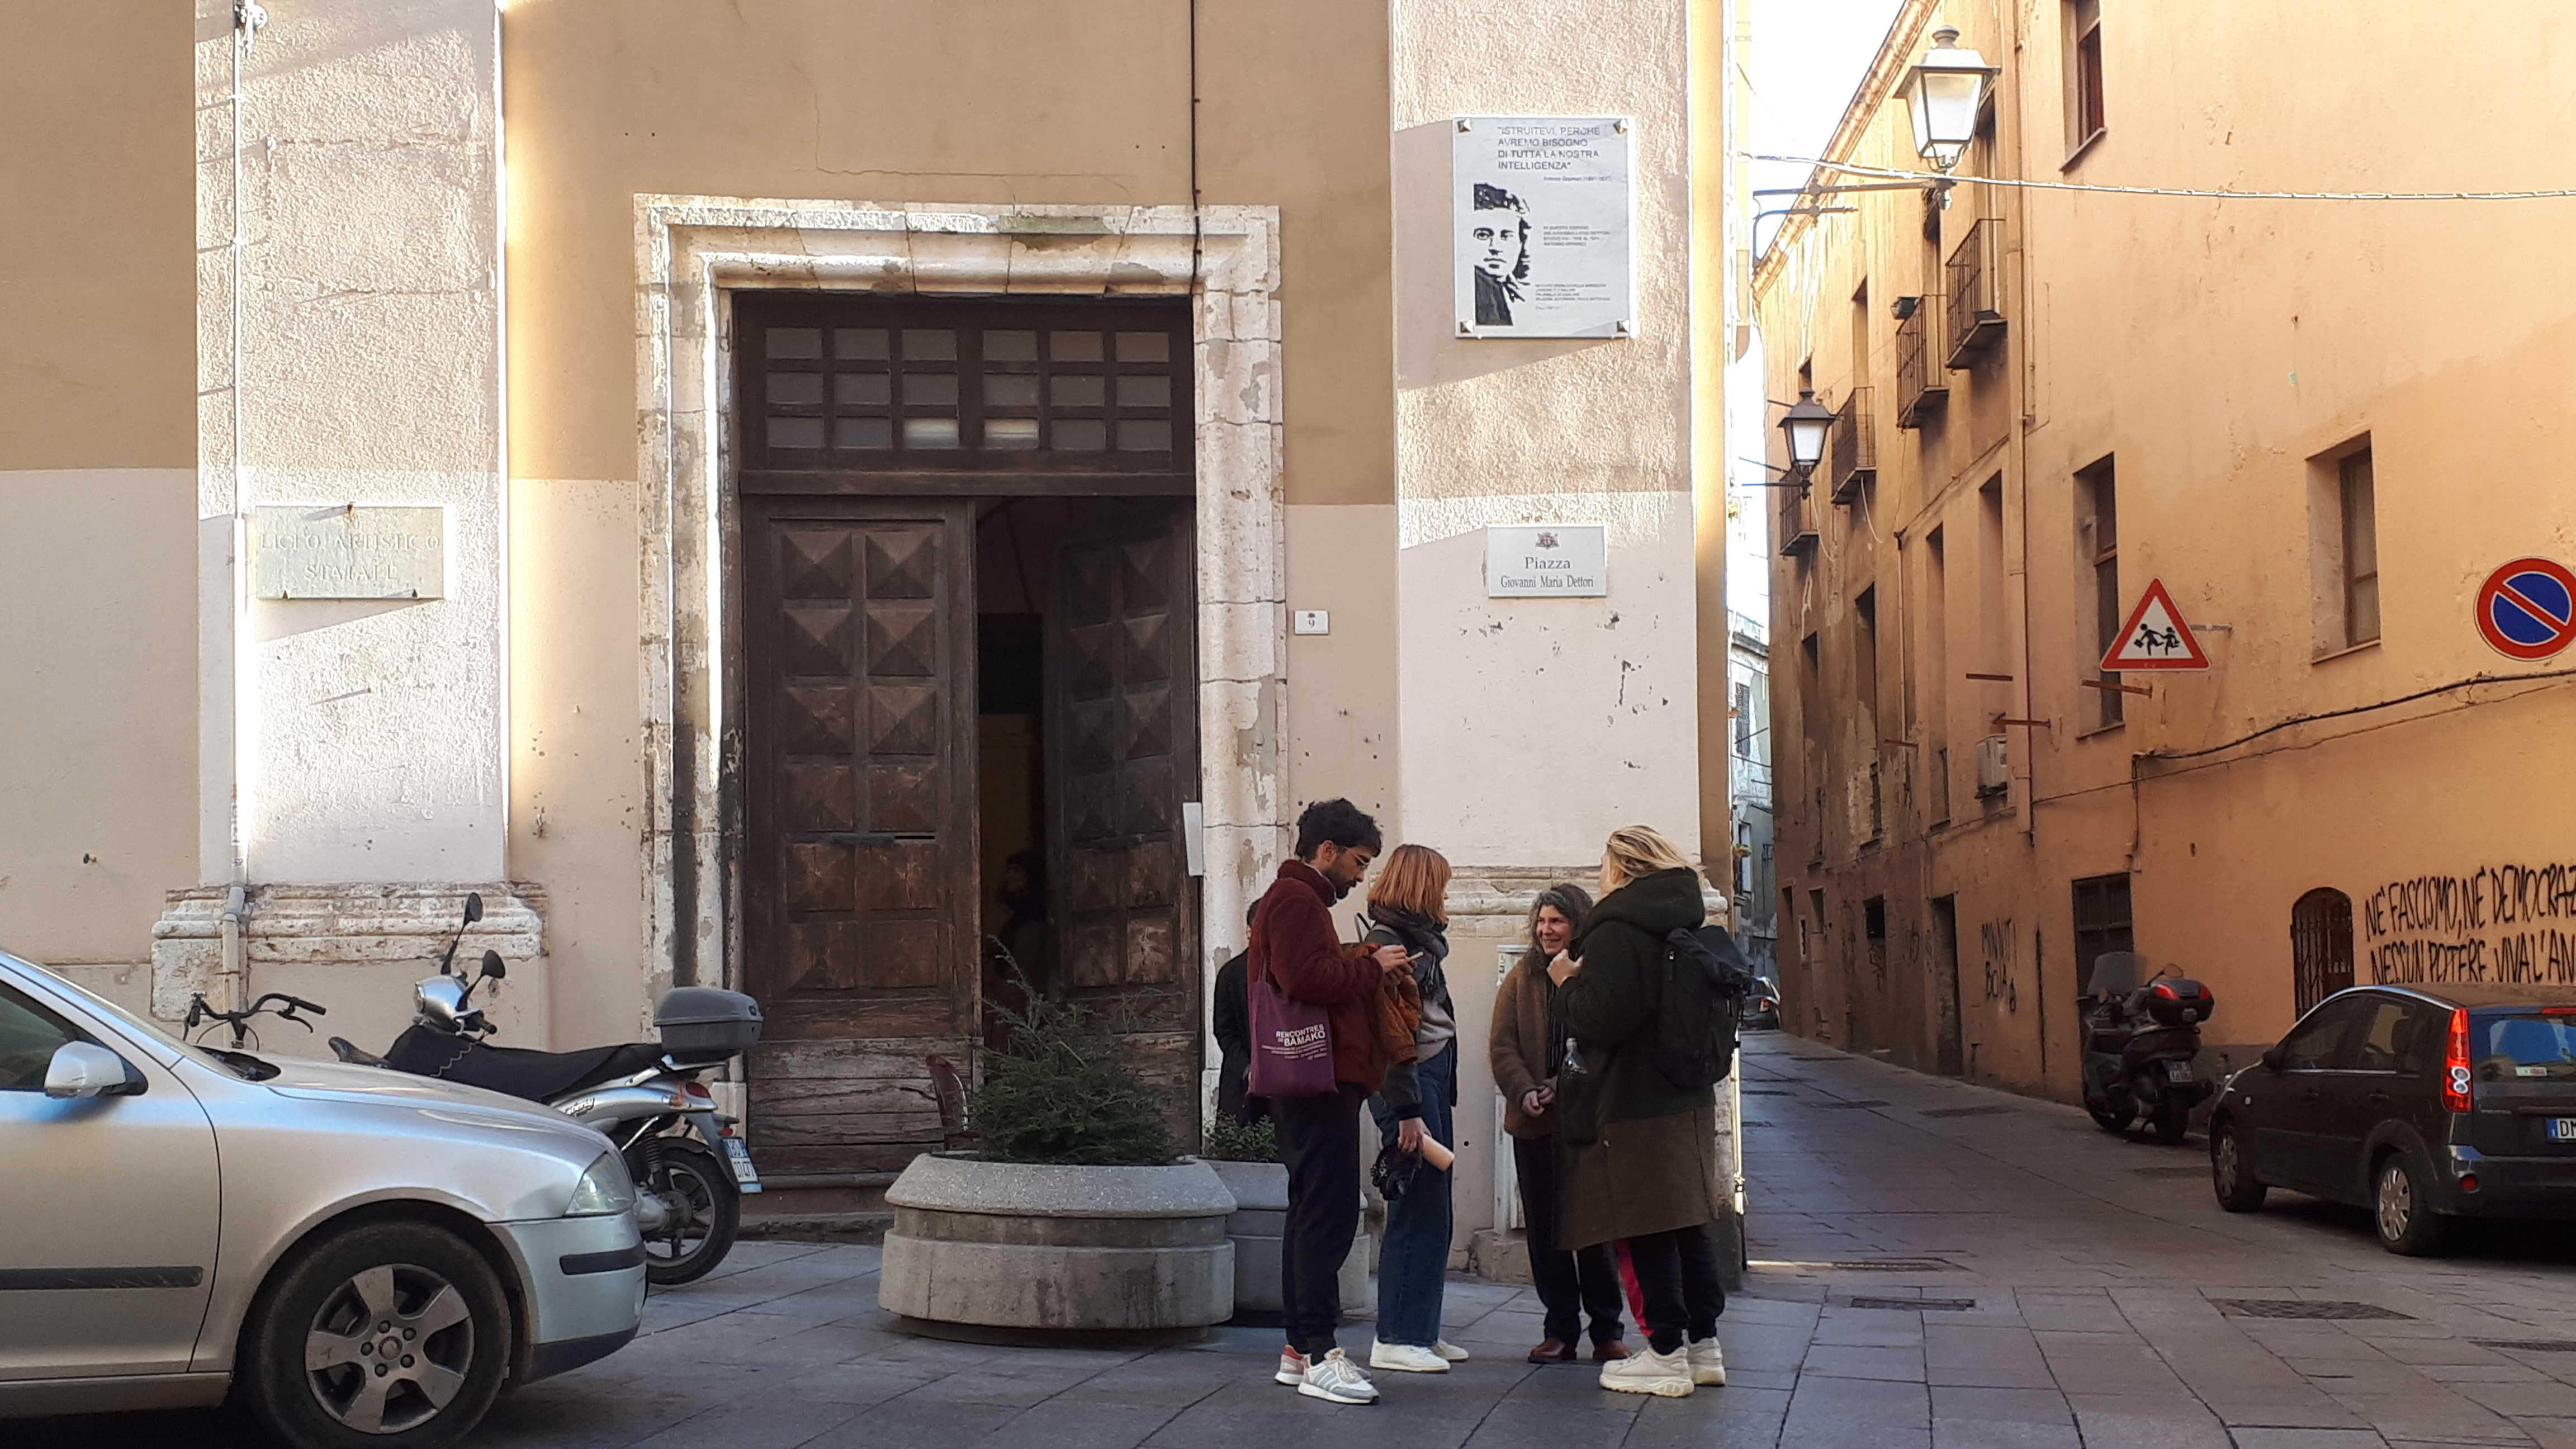 Rana Hamadeh with students from Justice Economy Factory workshop outside  the school of Antonio Gramsci. Photo credits: Nikos Doulos